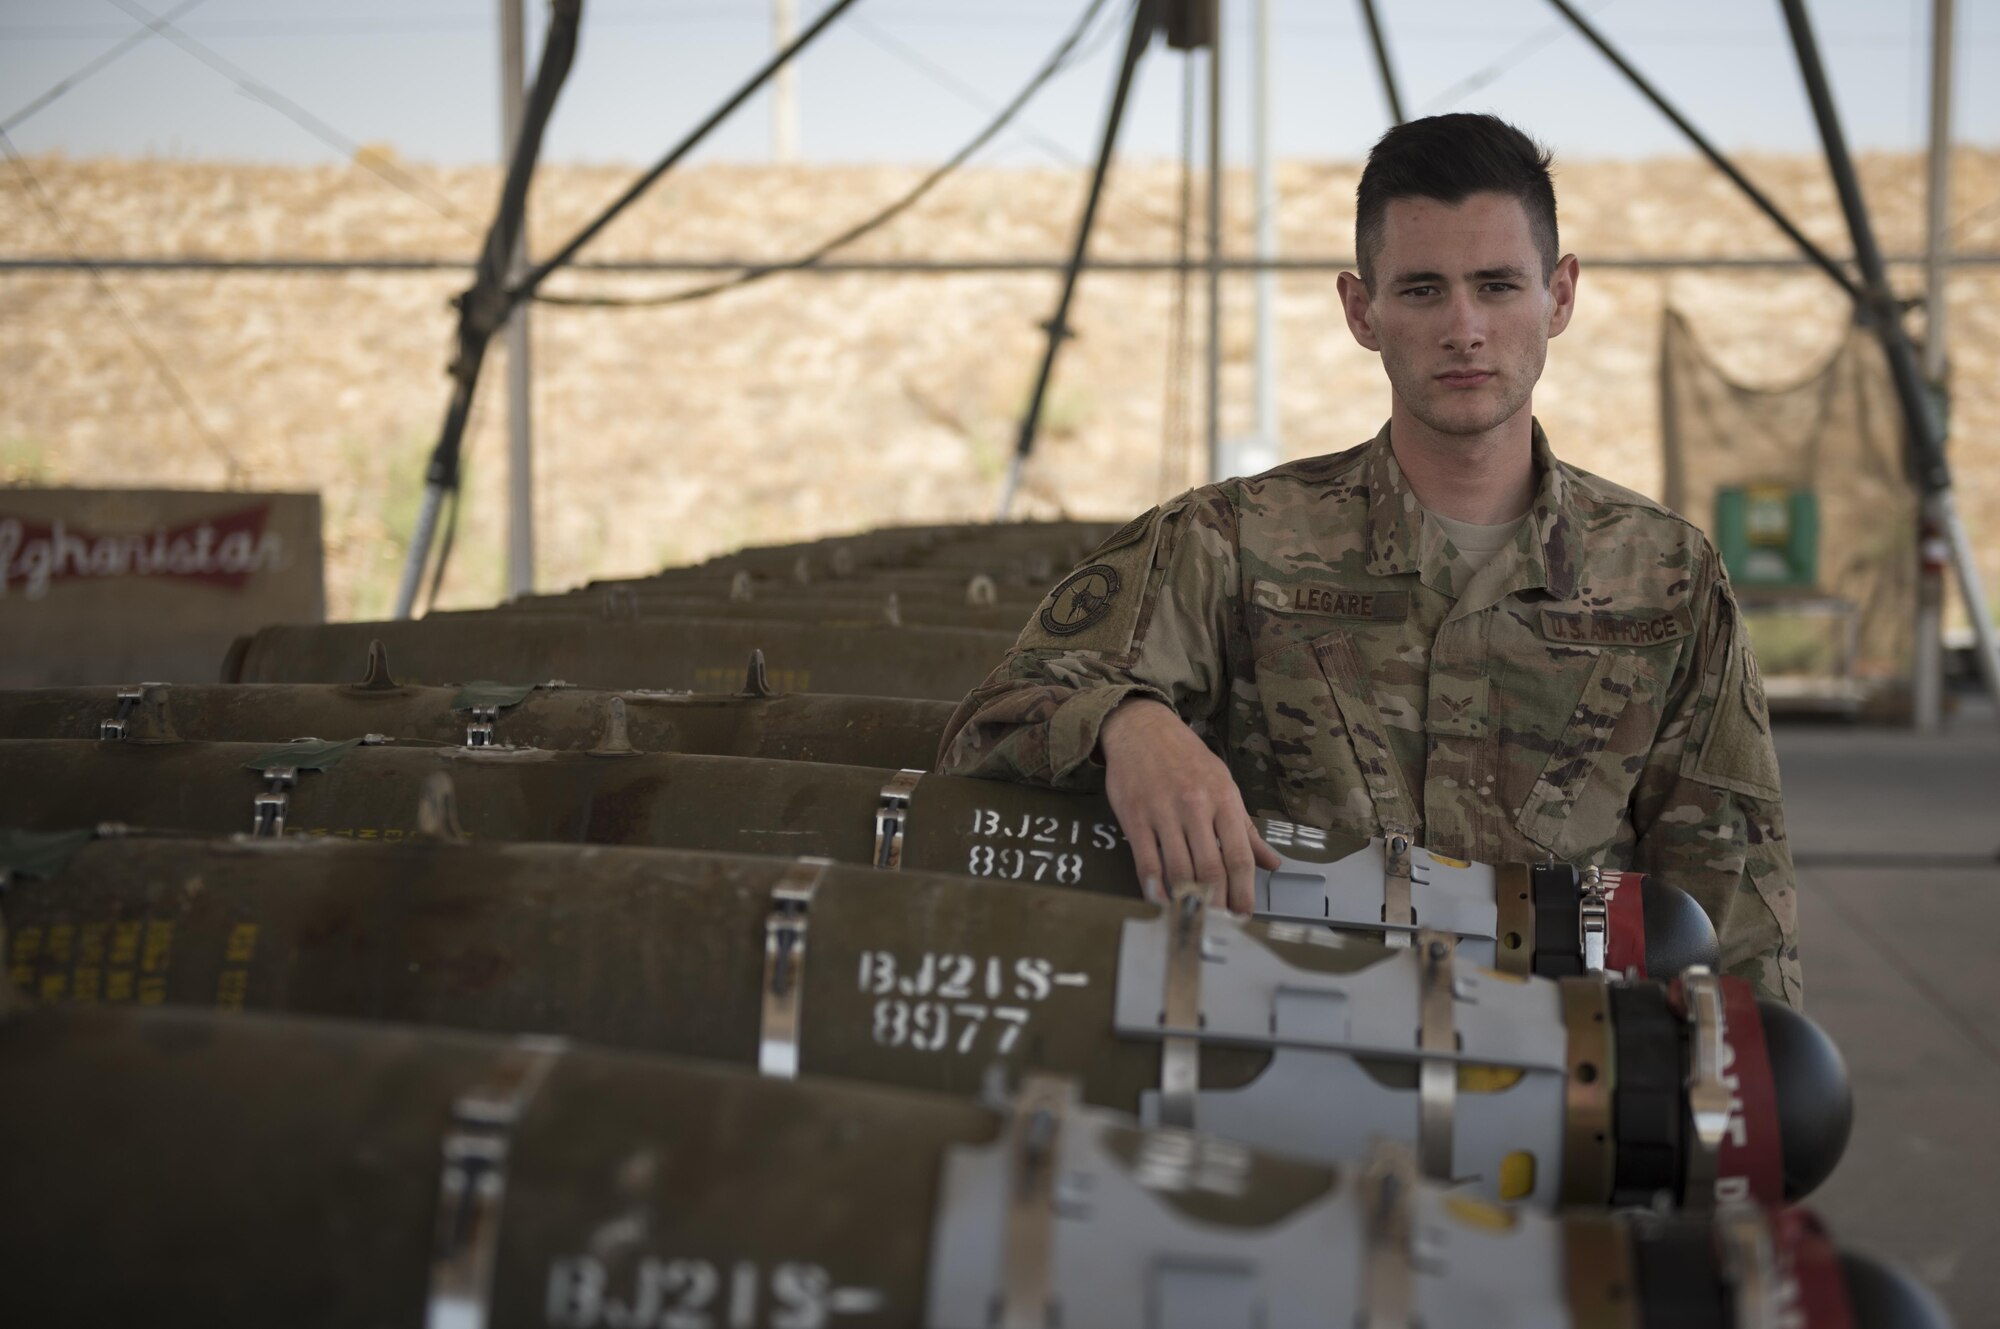 Airman 1st Class Peter Legare is a munitions systems specialist assigned to the 455th Expeditionary Maintenance Squadron, Bagram Airfield, Afghanistan.